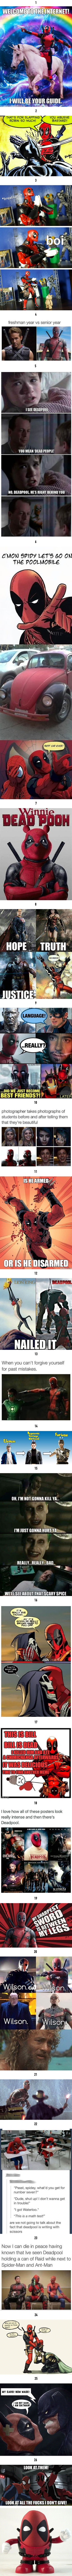 26 DEADPOOL Memes That Will Leave You Bloody And Breathless 9GAG